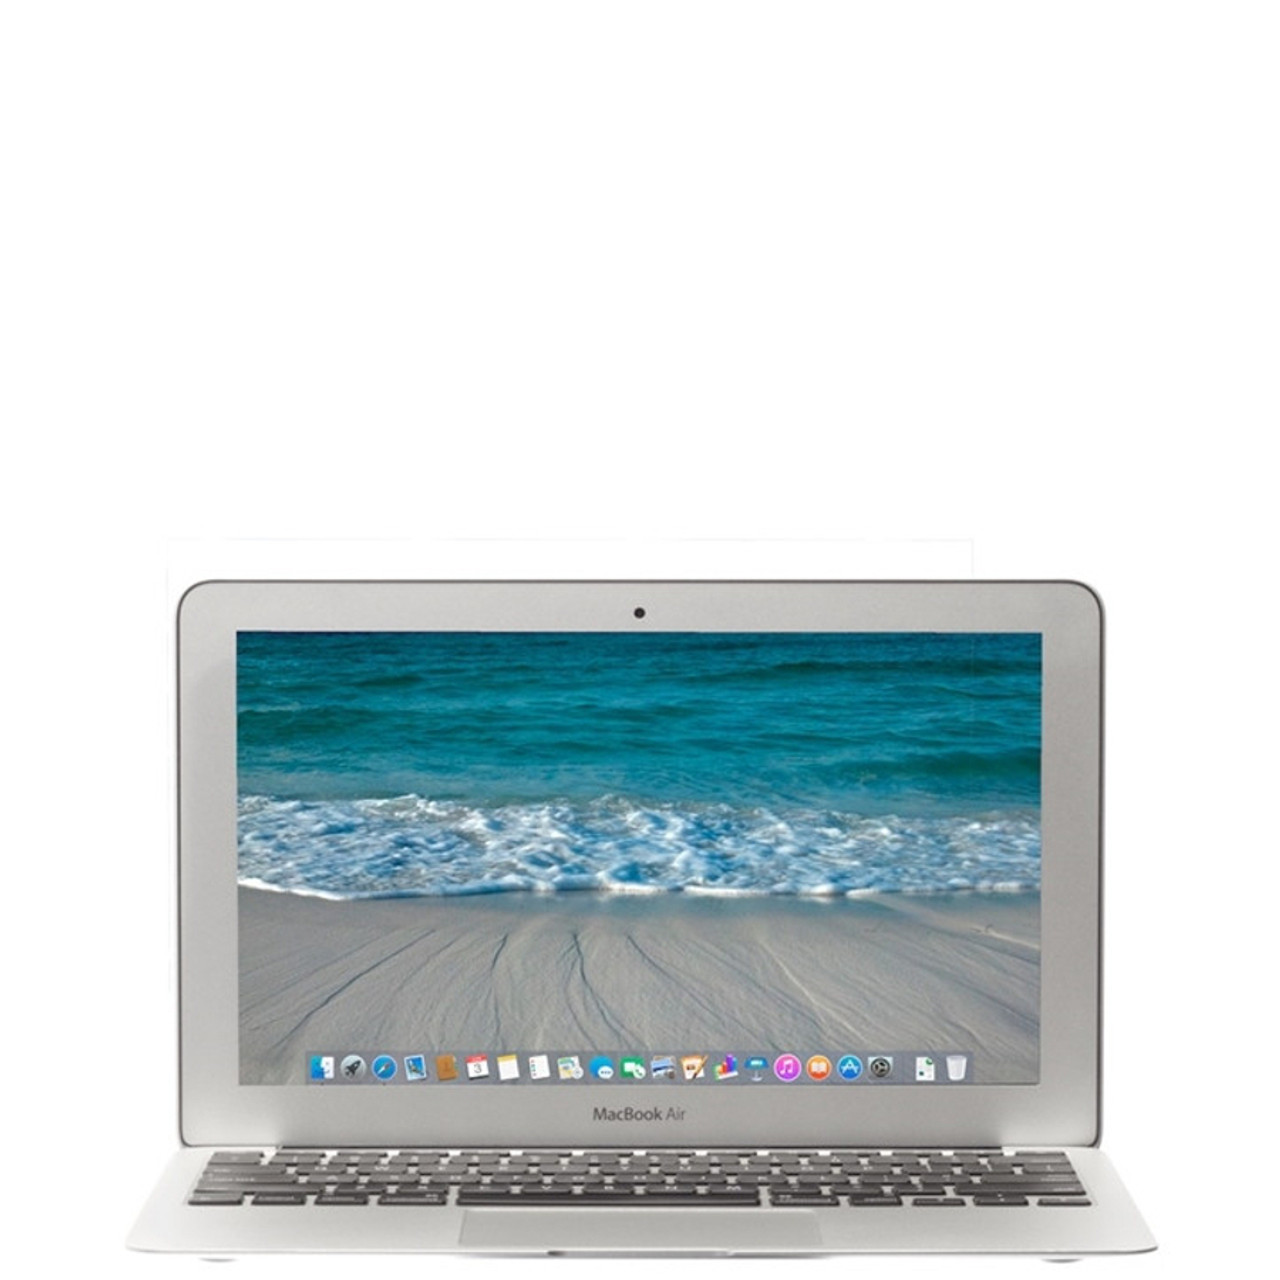 Apple MacBook Air 11-inch 1.7GHz Core i7 (Mid 2013)